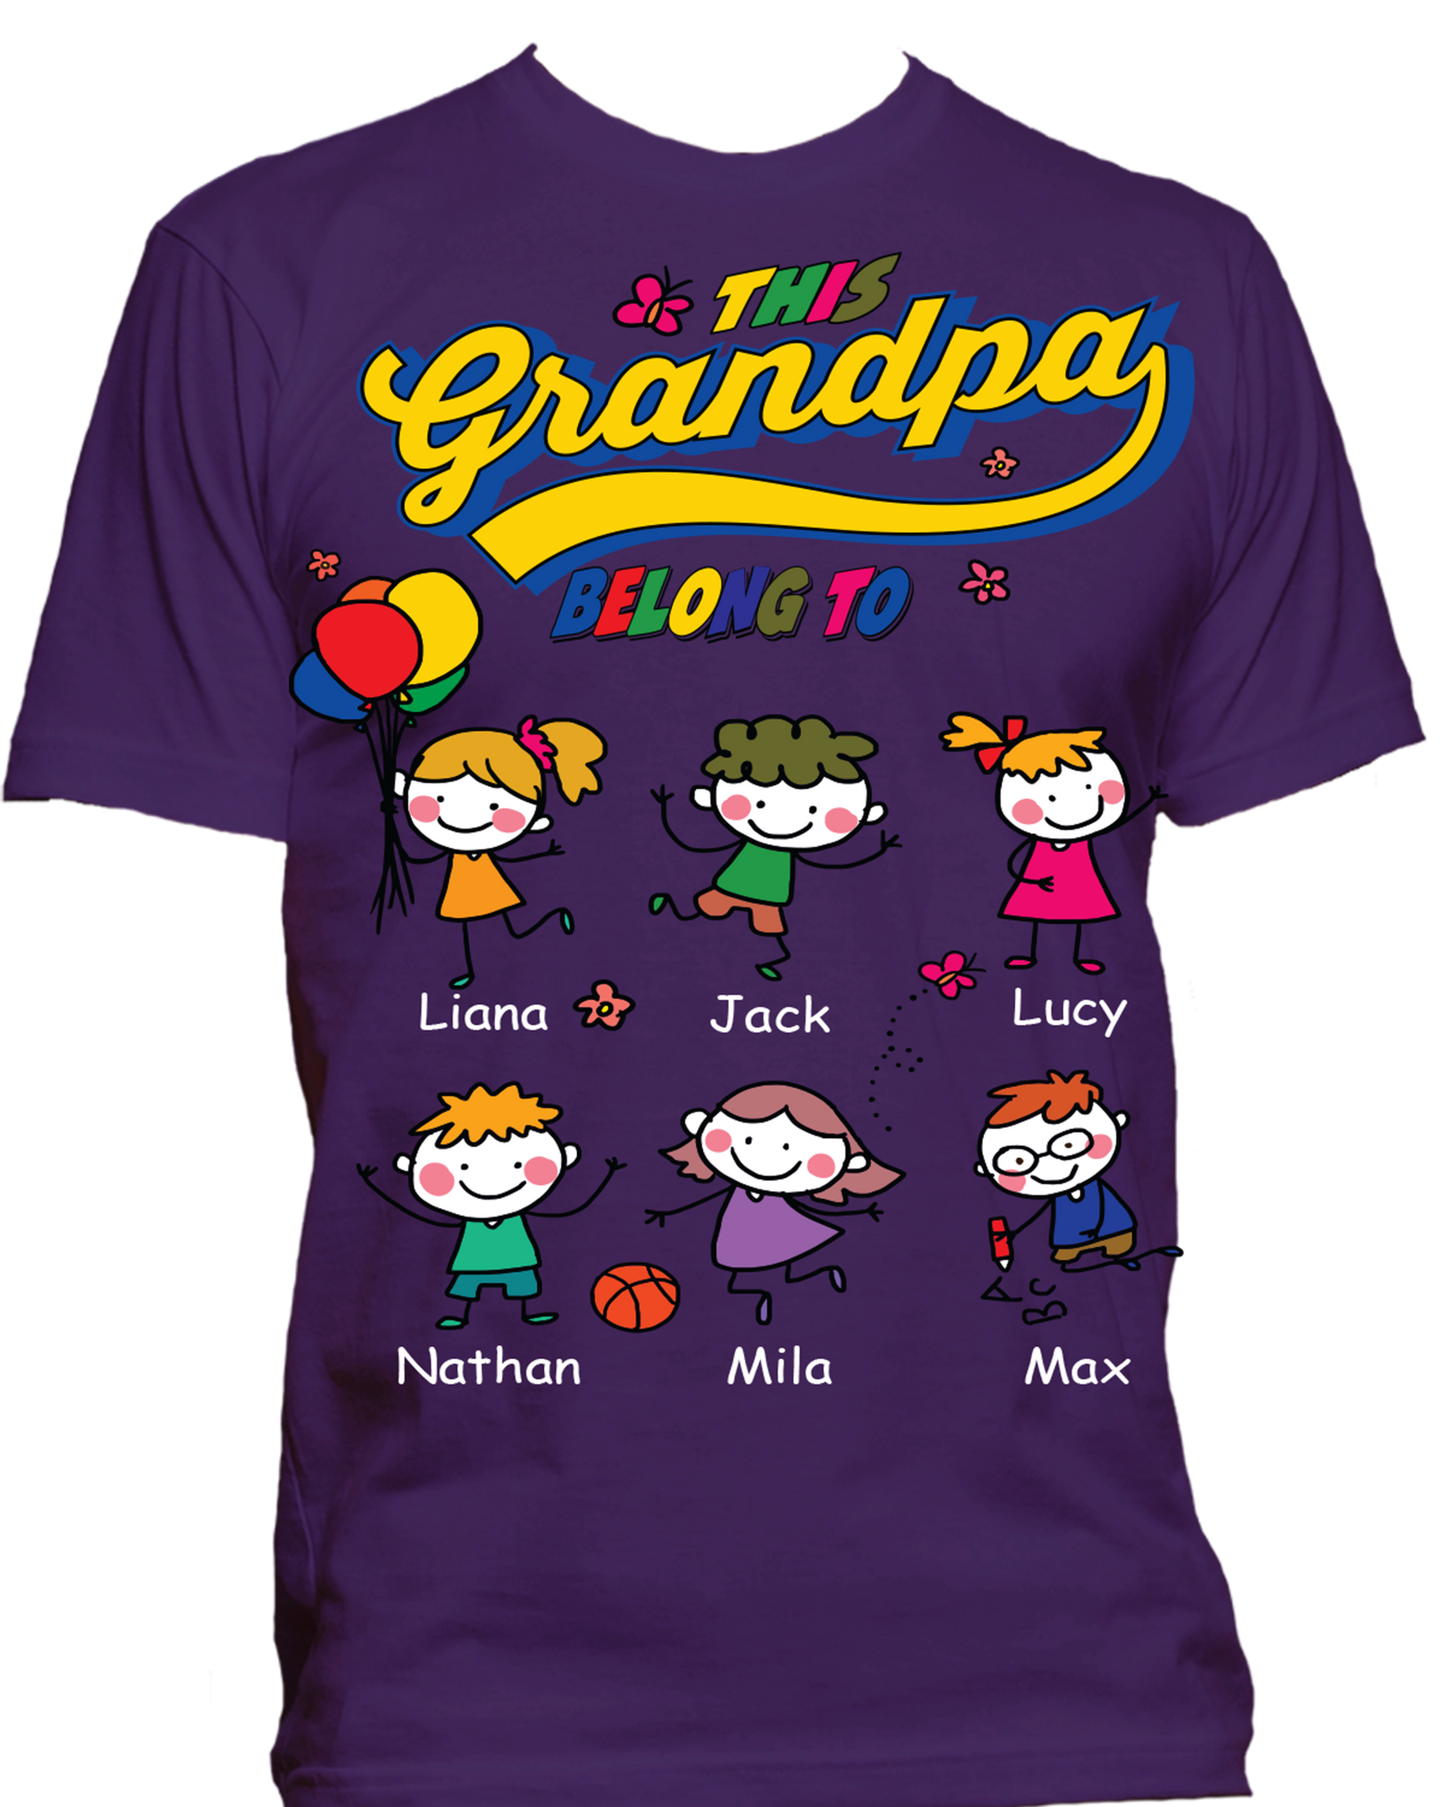 This Grandpa Belongs to T-Shirts Hoodies ***On Sale Today Only***